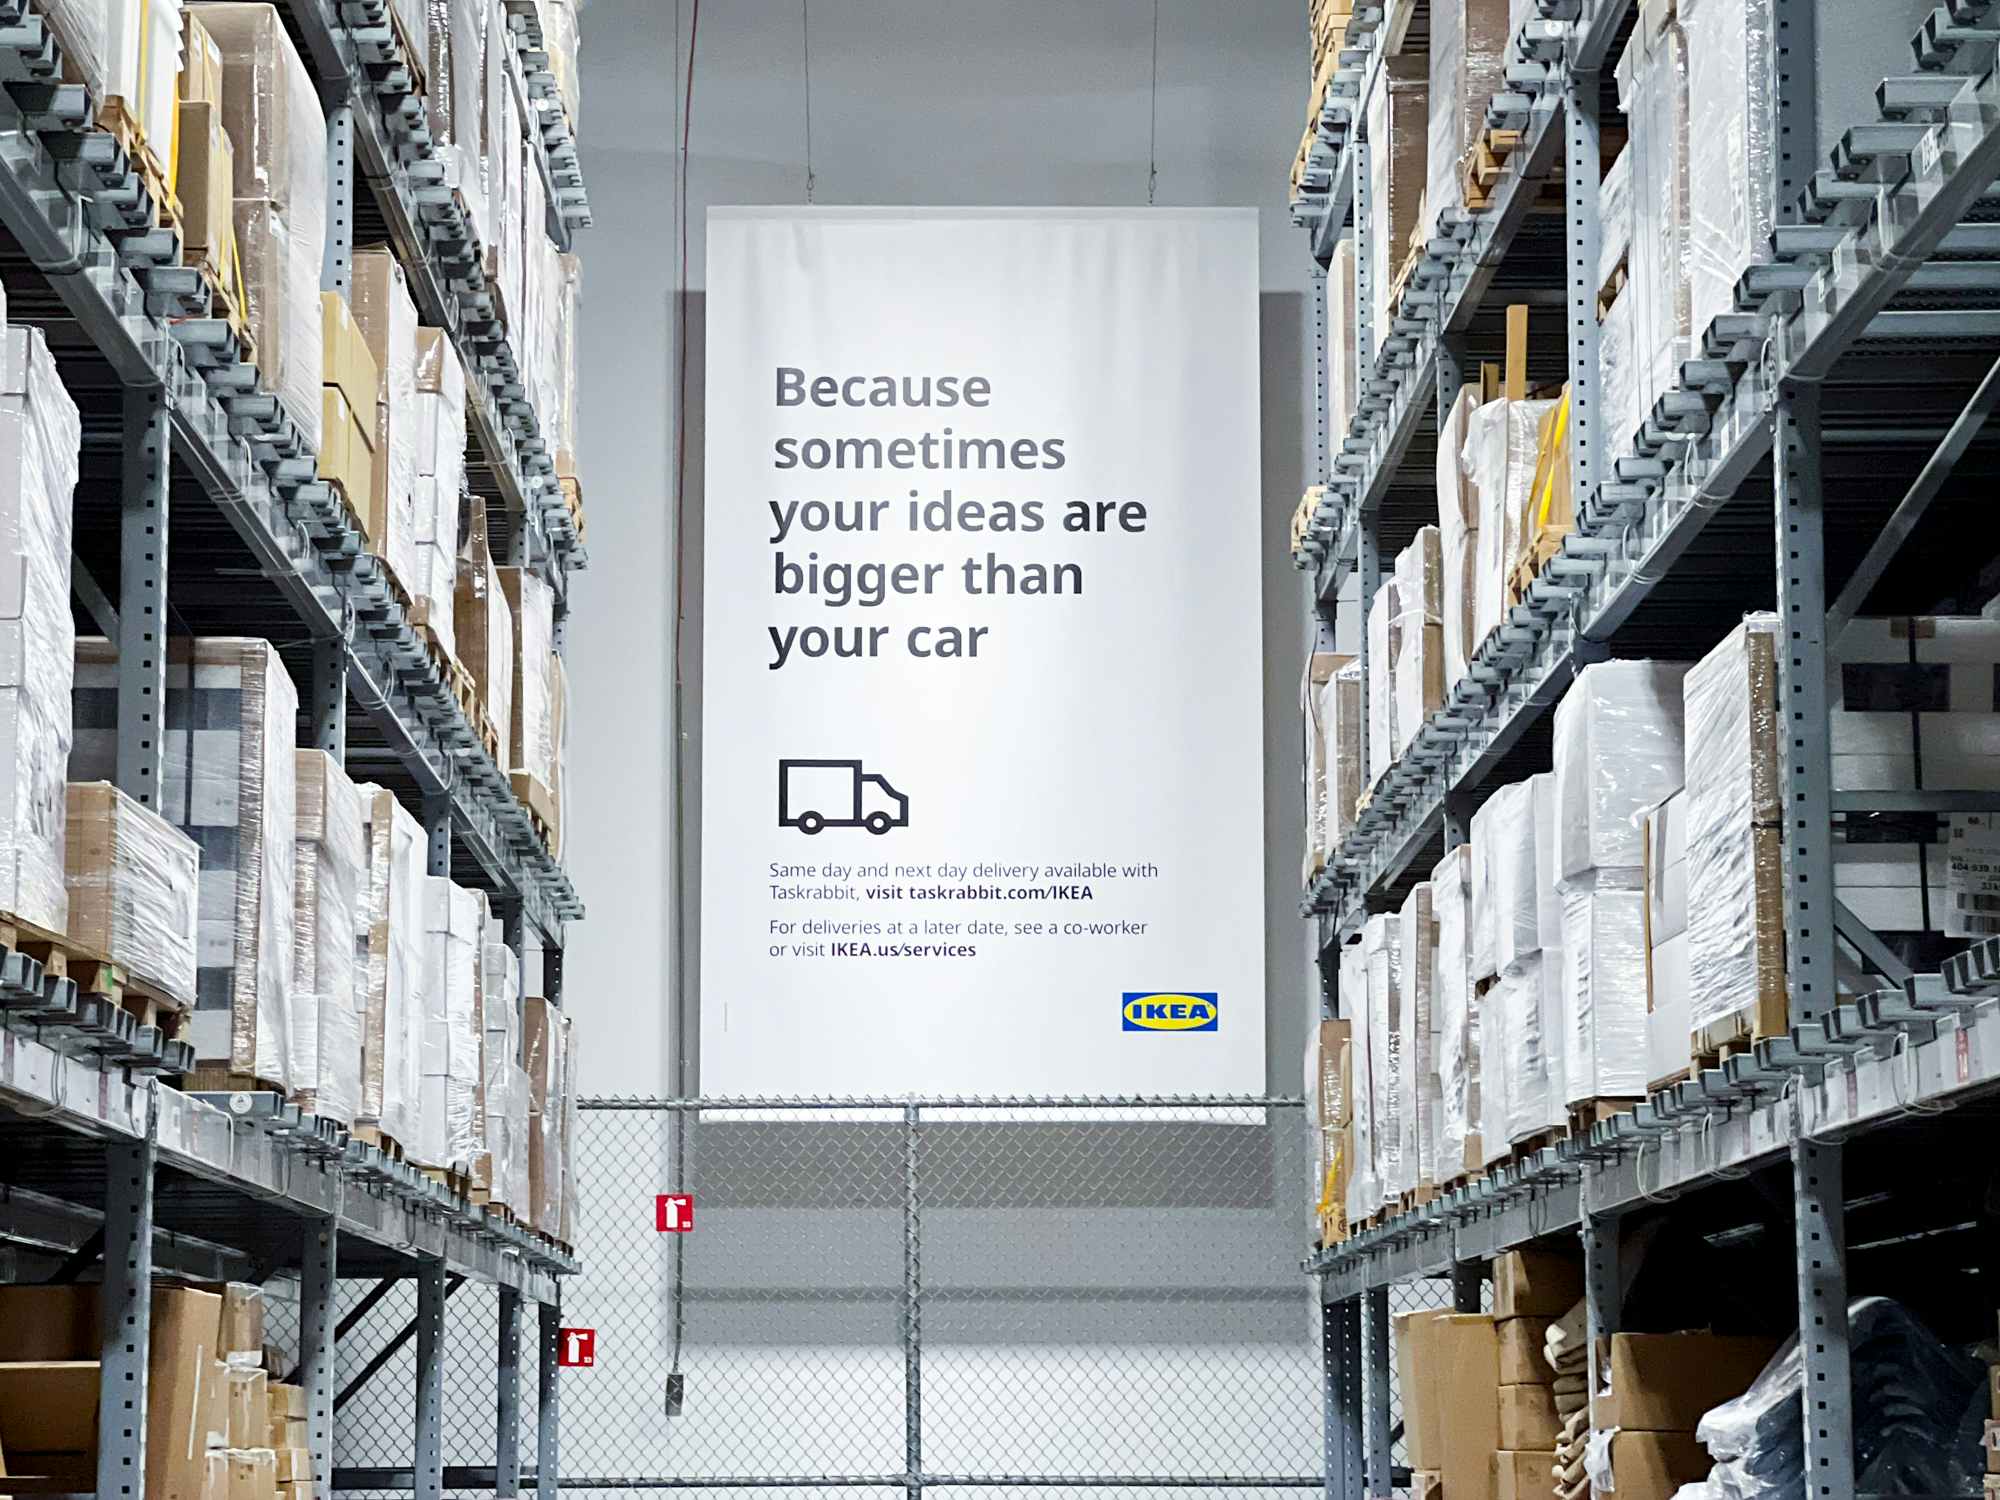 a sign in the warehouse of Ikea advertising the same day delivery service